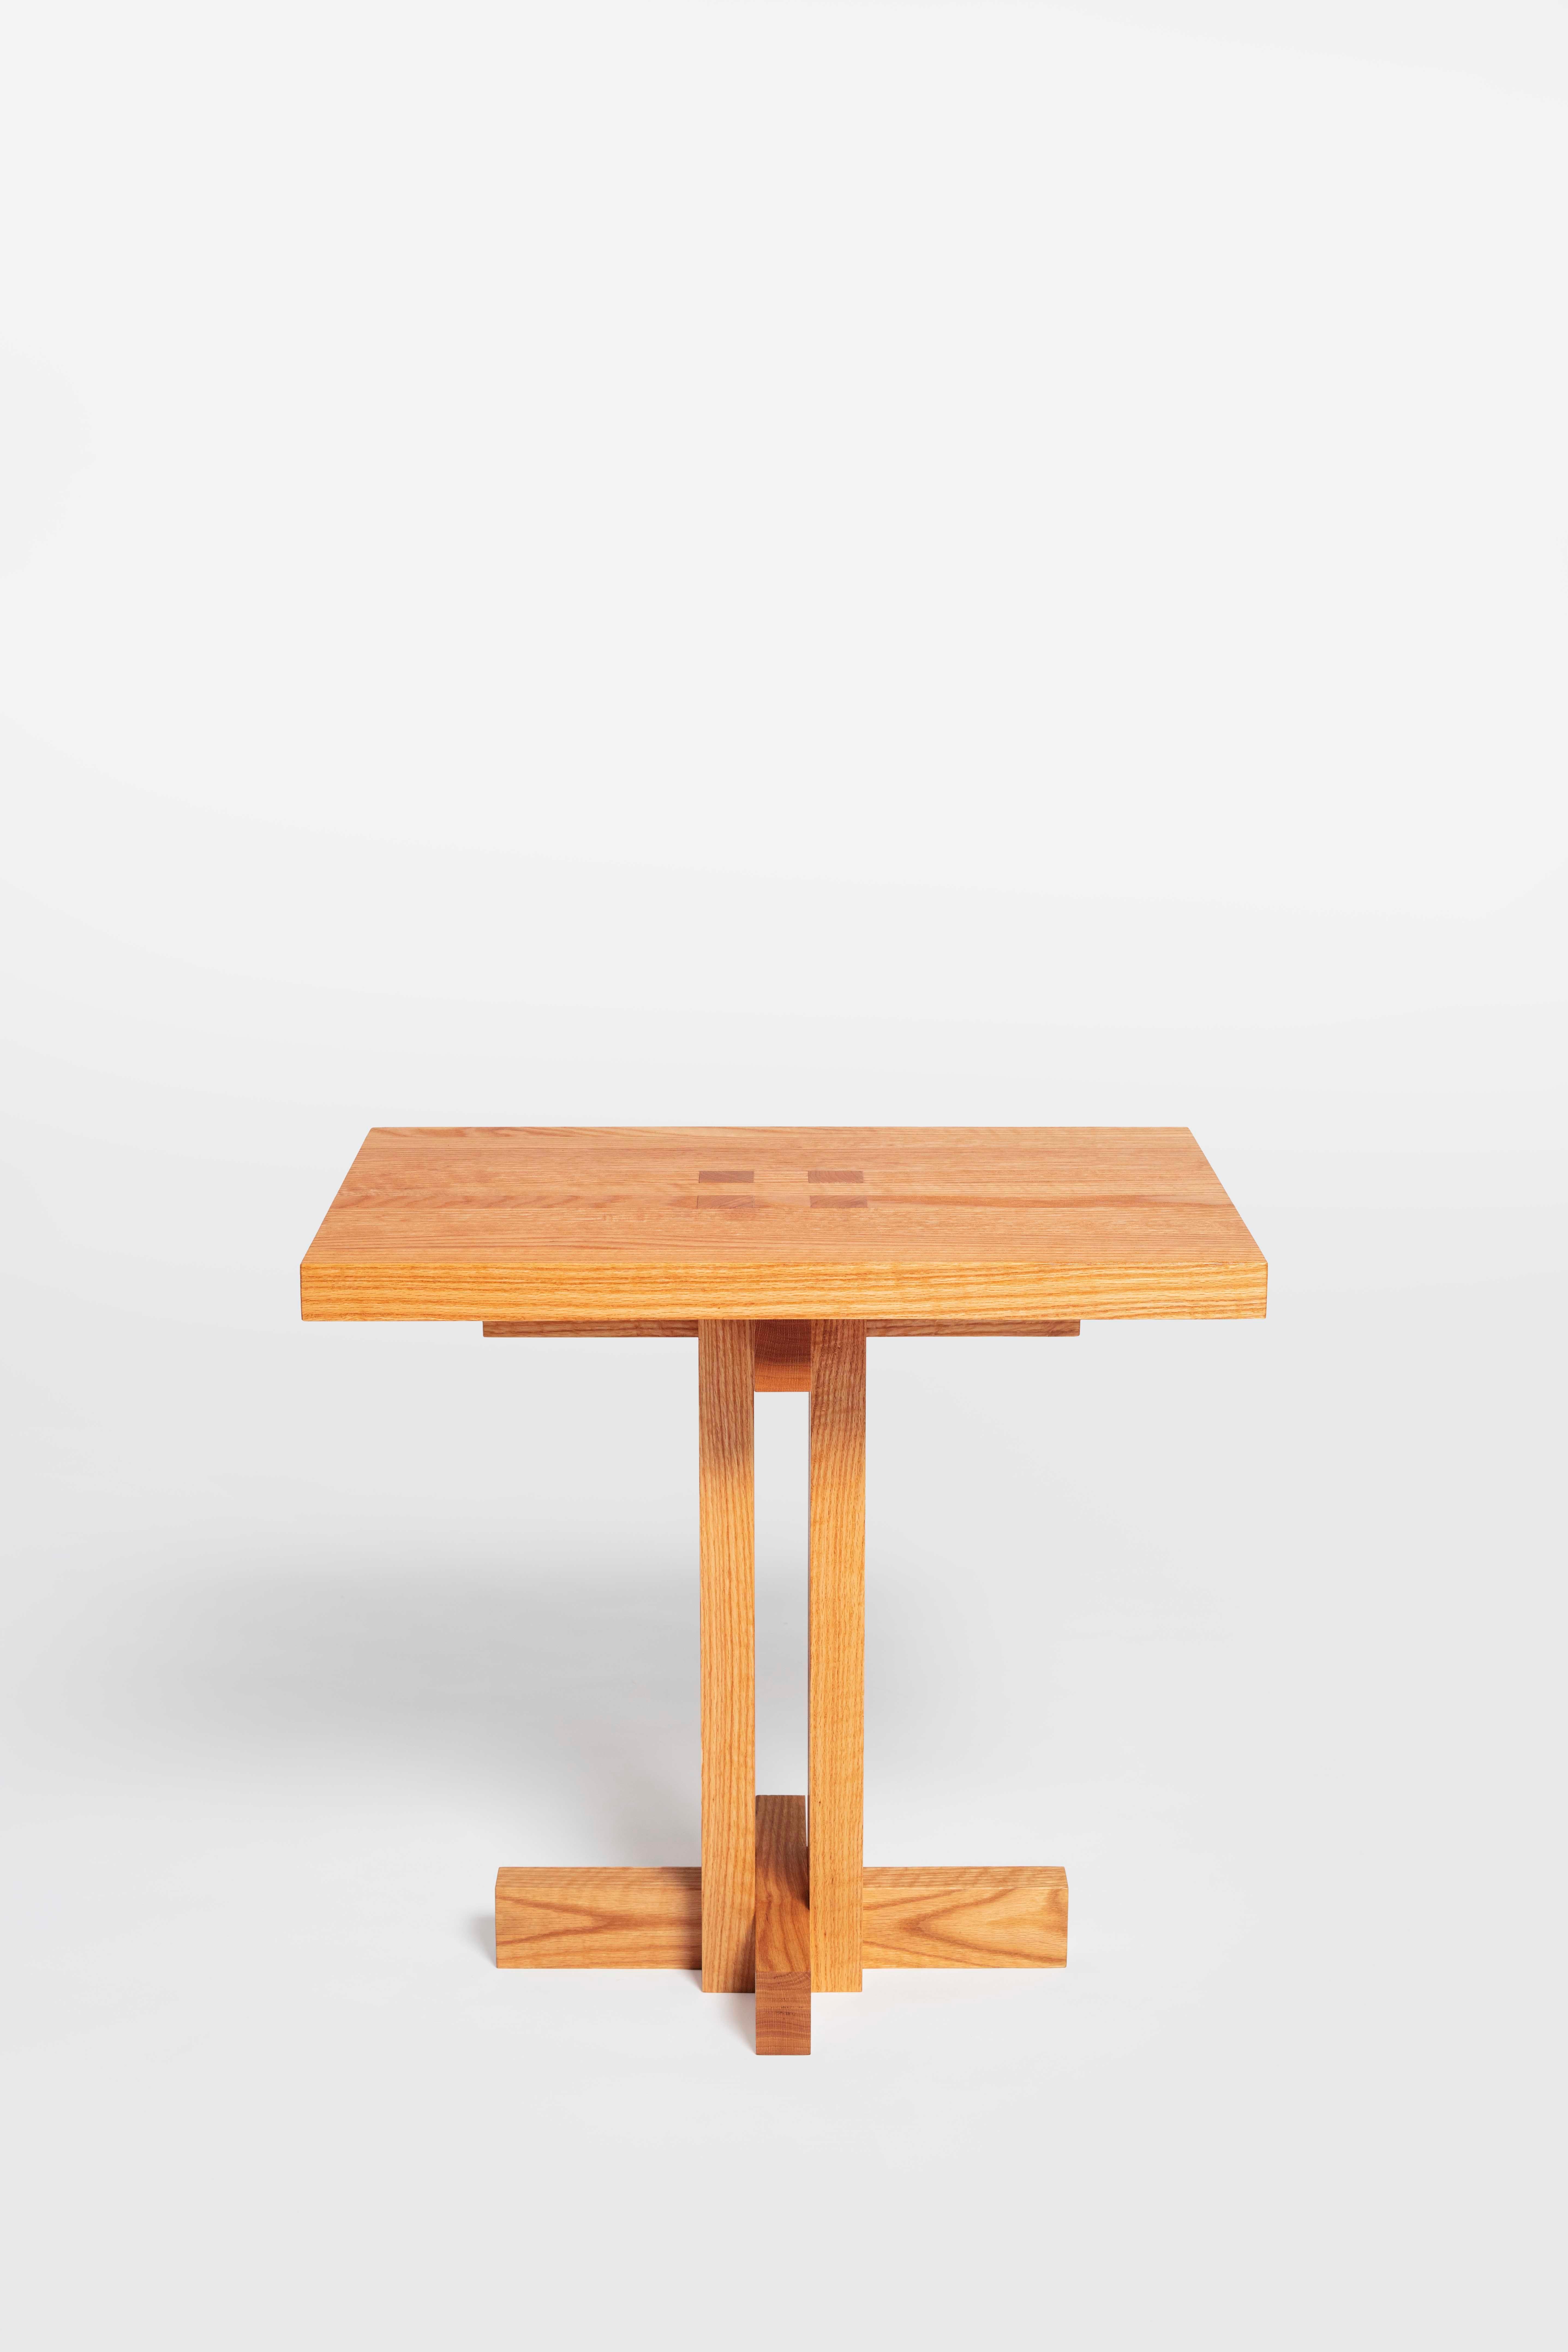 Ray Kappe RK12 side table in red oak by Original in Berlin, Germany, 2020

California Modernism is synonymous with sophisticated minimal structures, featuring open plan design and indoor-outdoor living, inspired by traditional Japanese